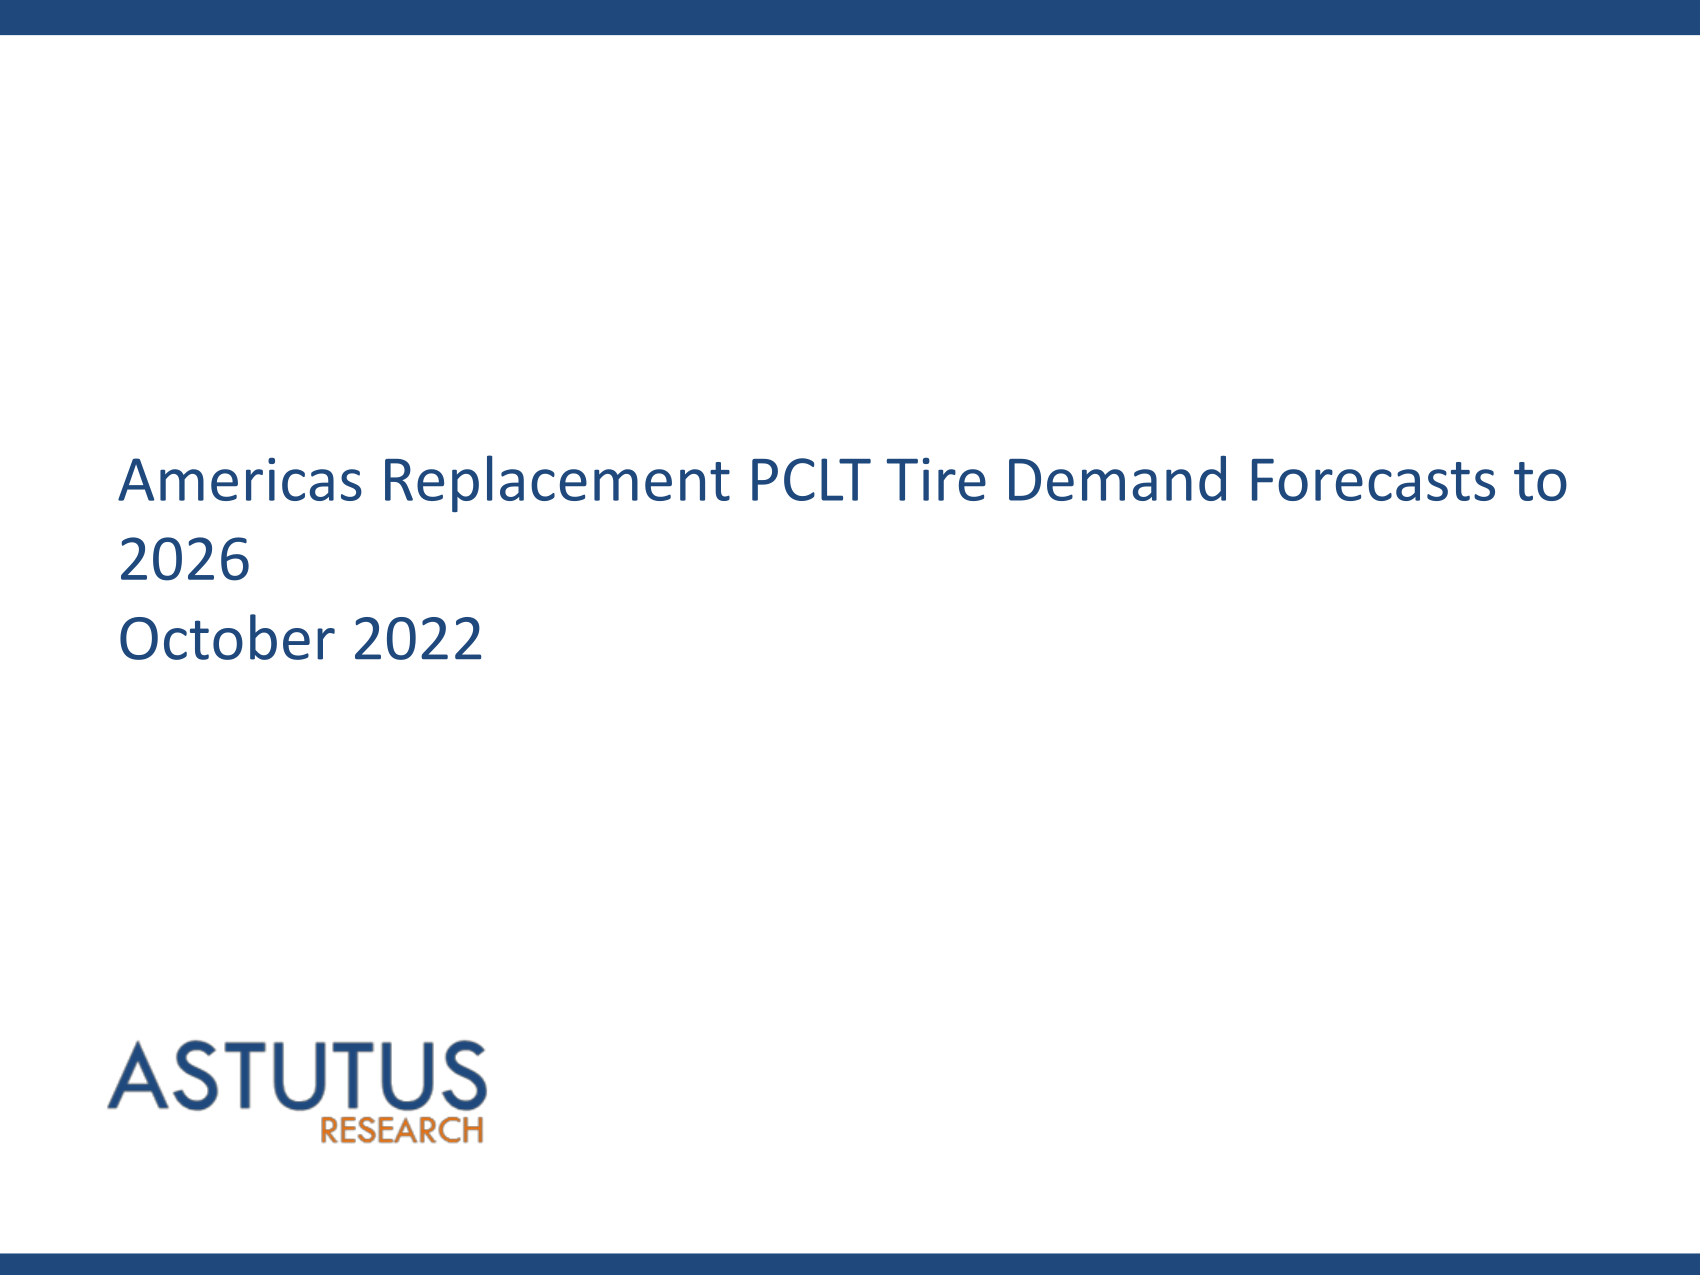 Americas Replacement PCLT Tire Market Forecasts to 2026